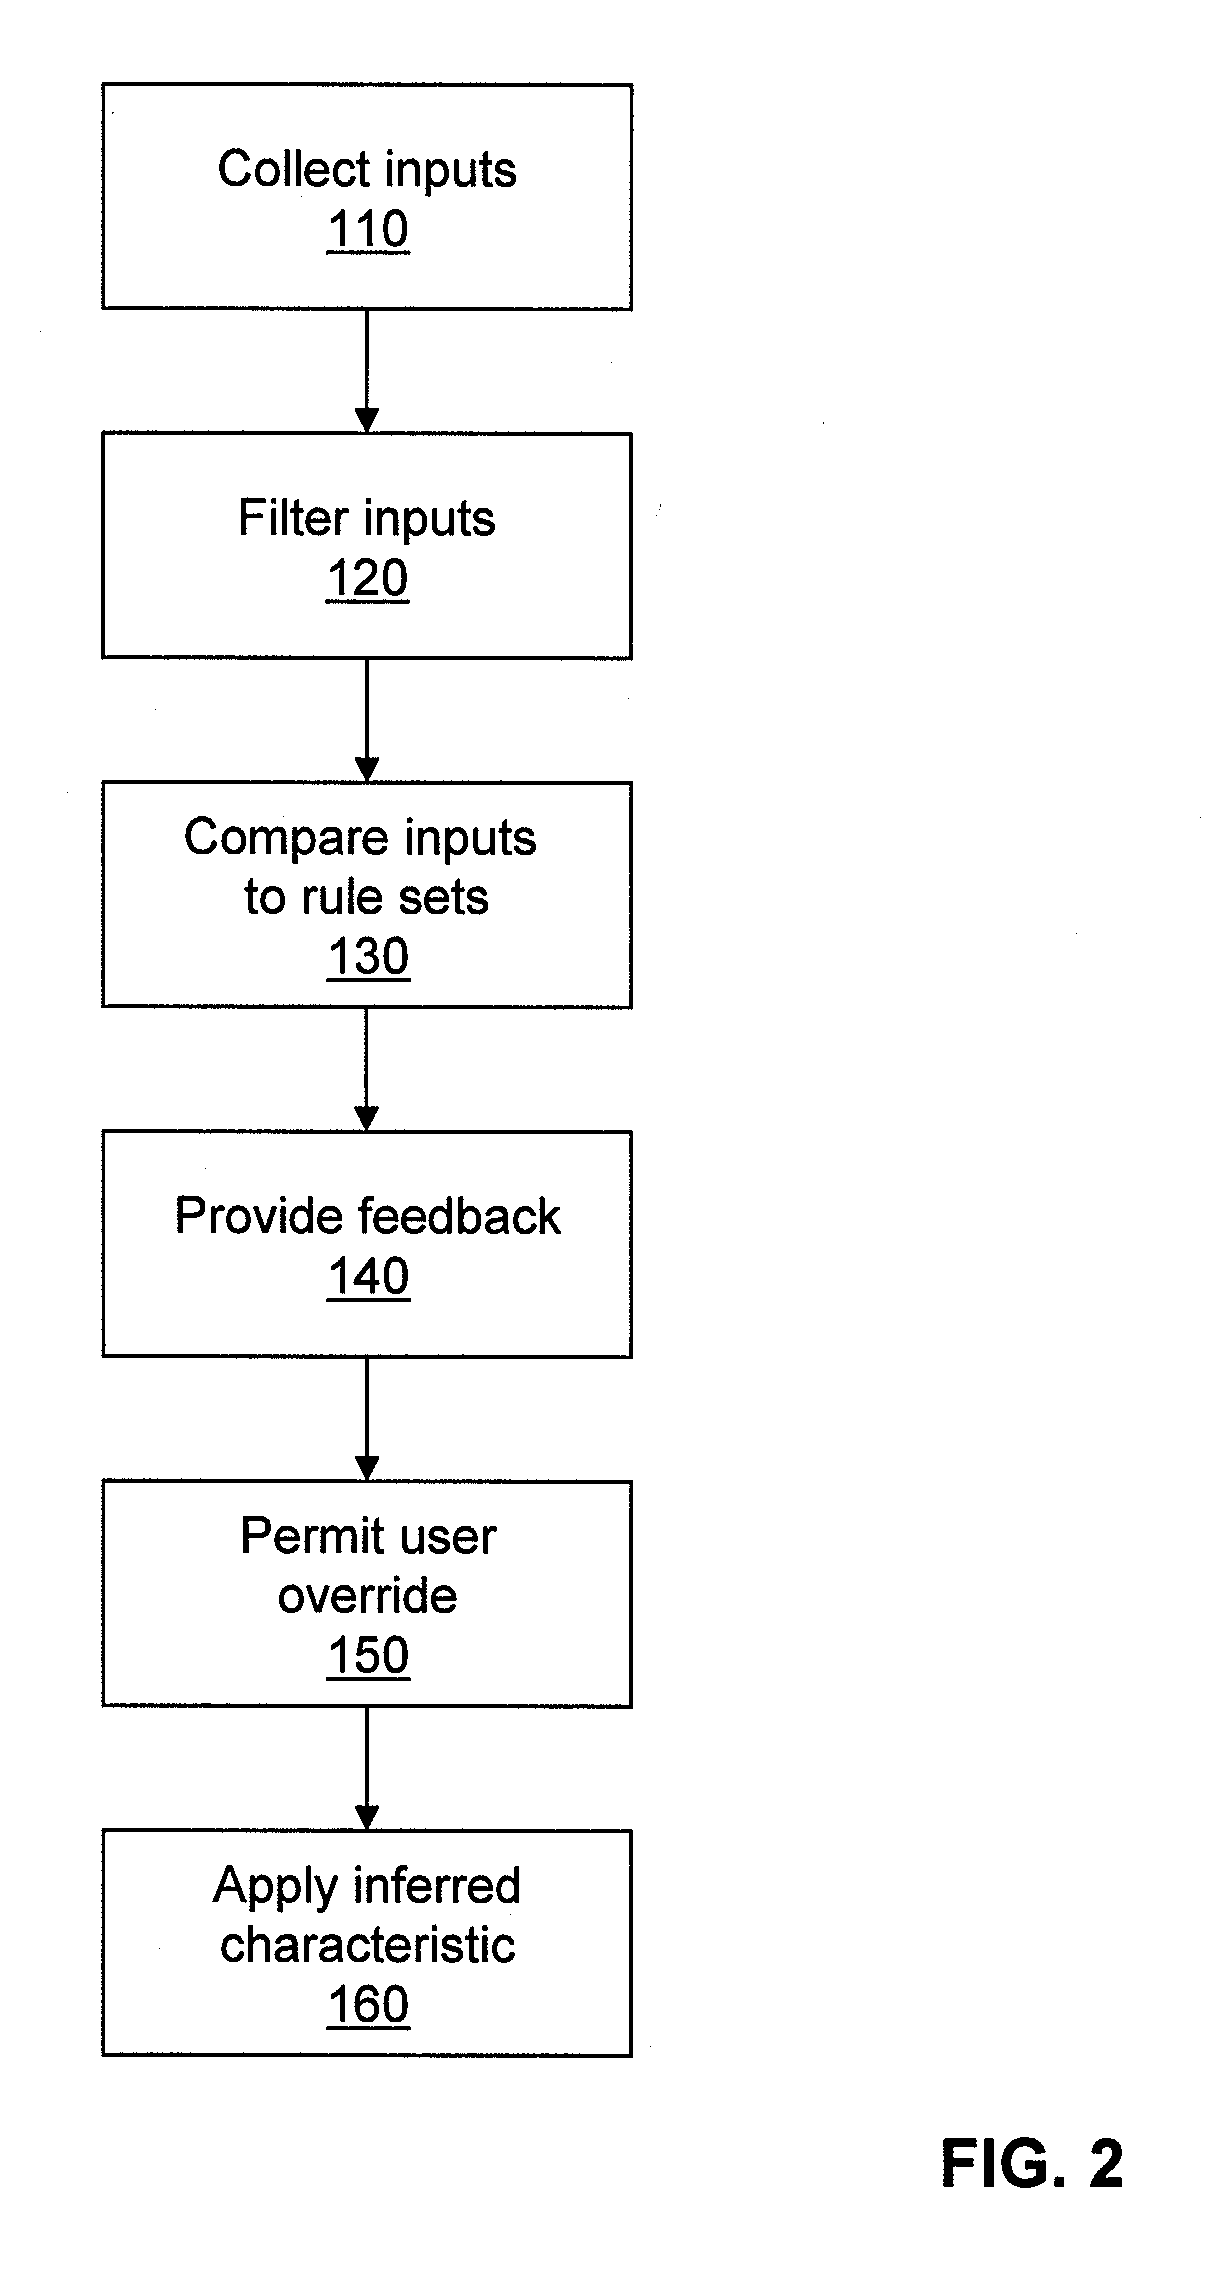 System and method to modify avatar characteristics based on inferred conditions